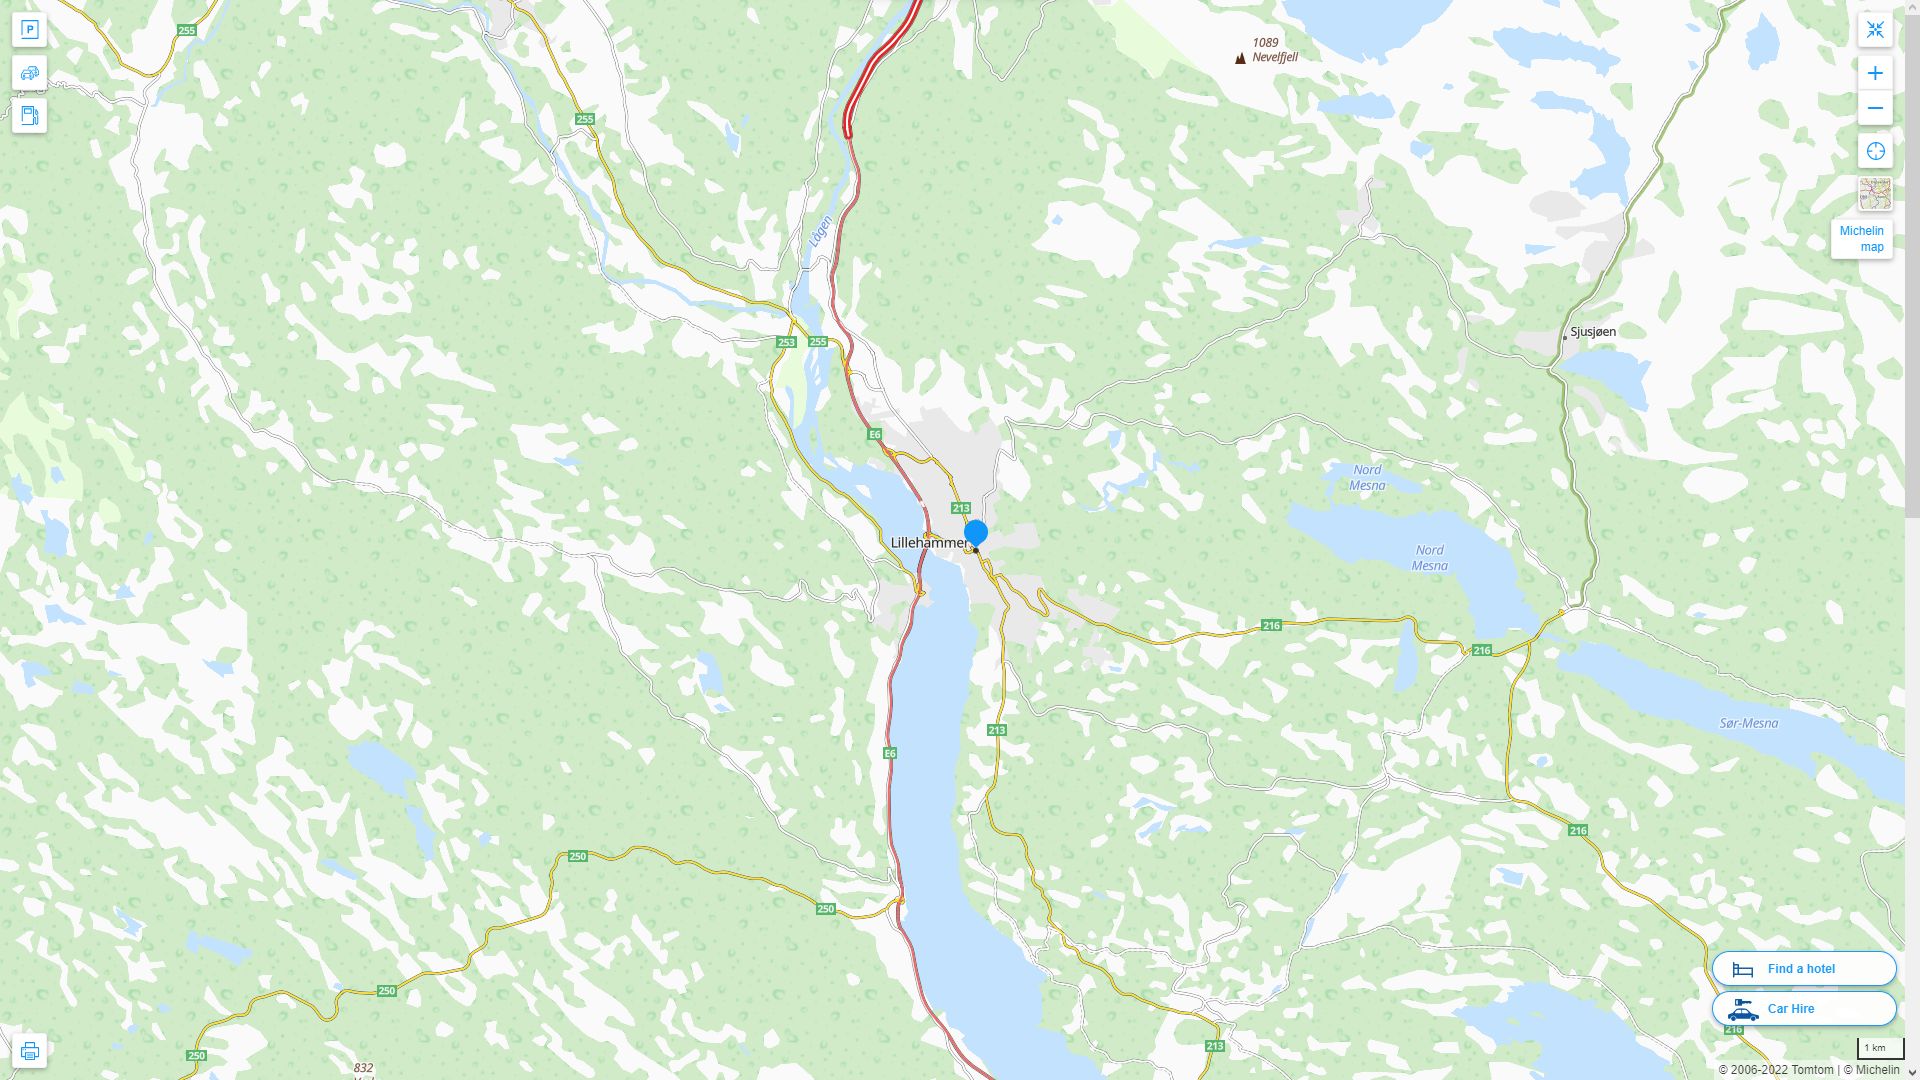 Lillehammer Highway and Road Map